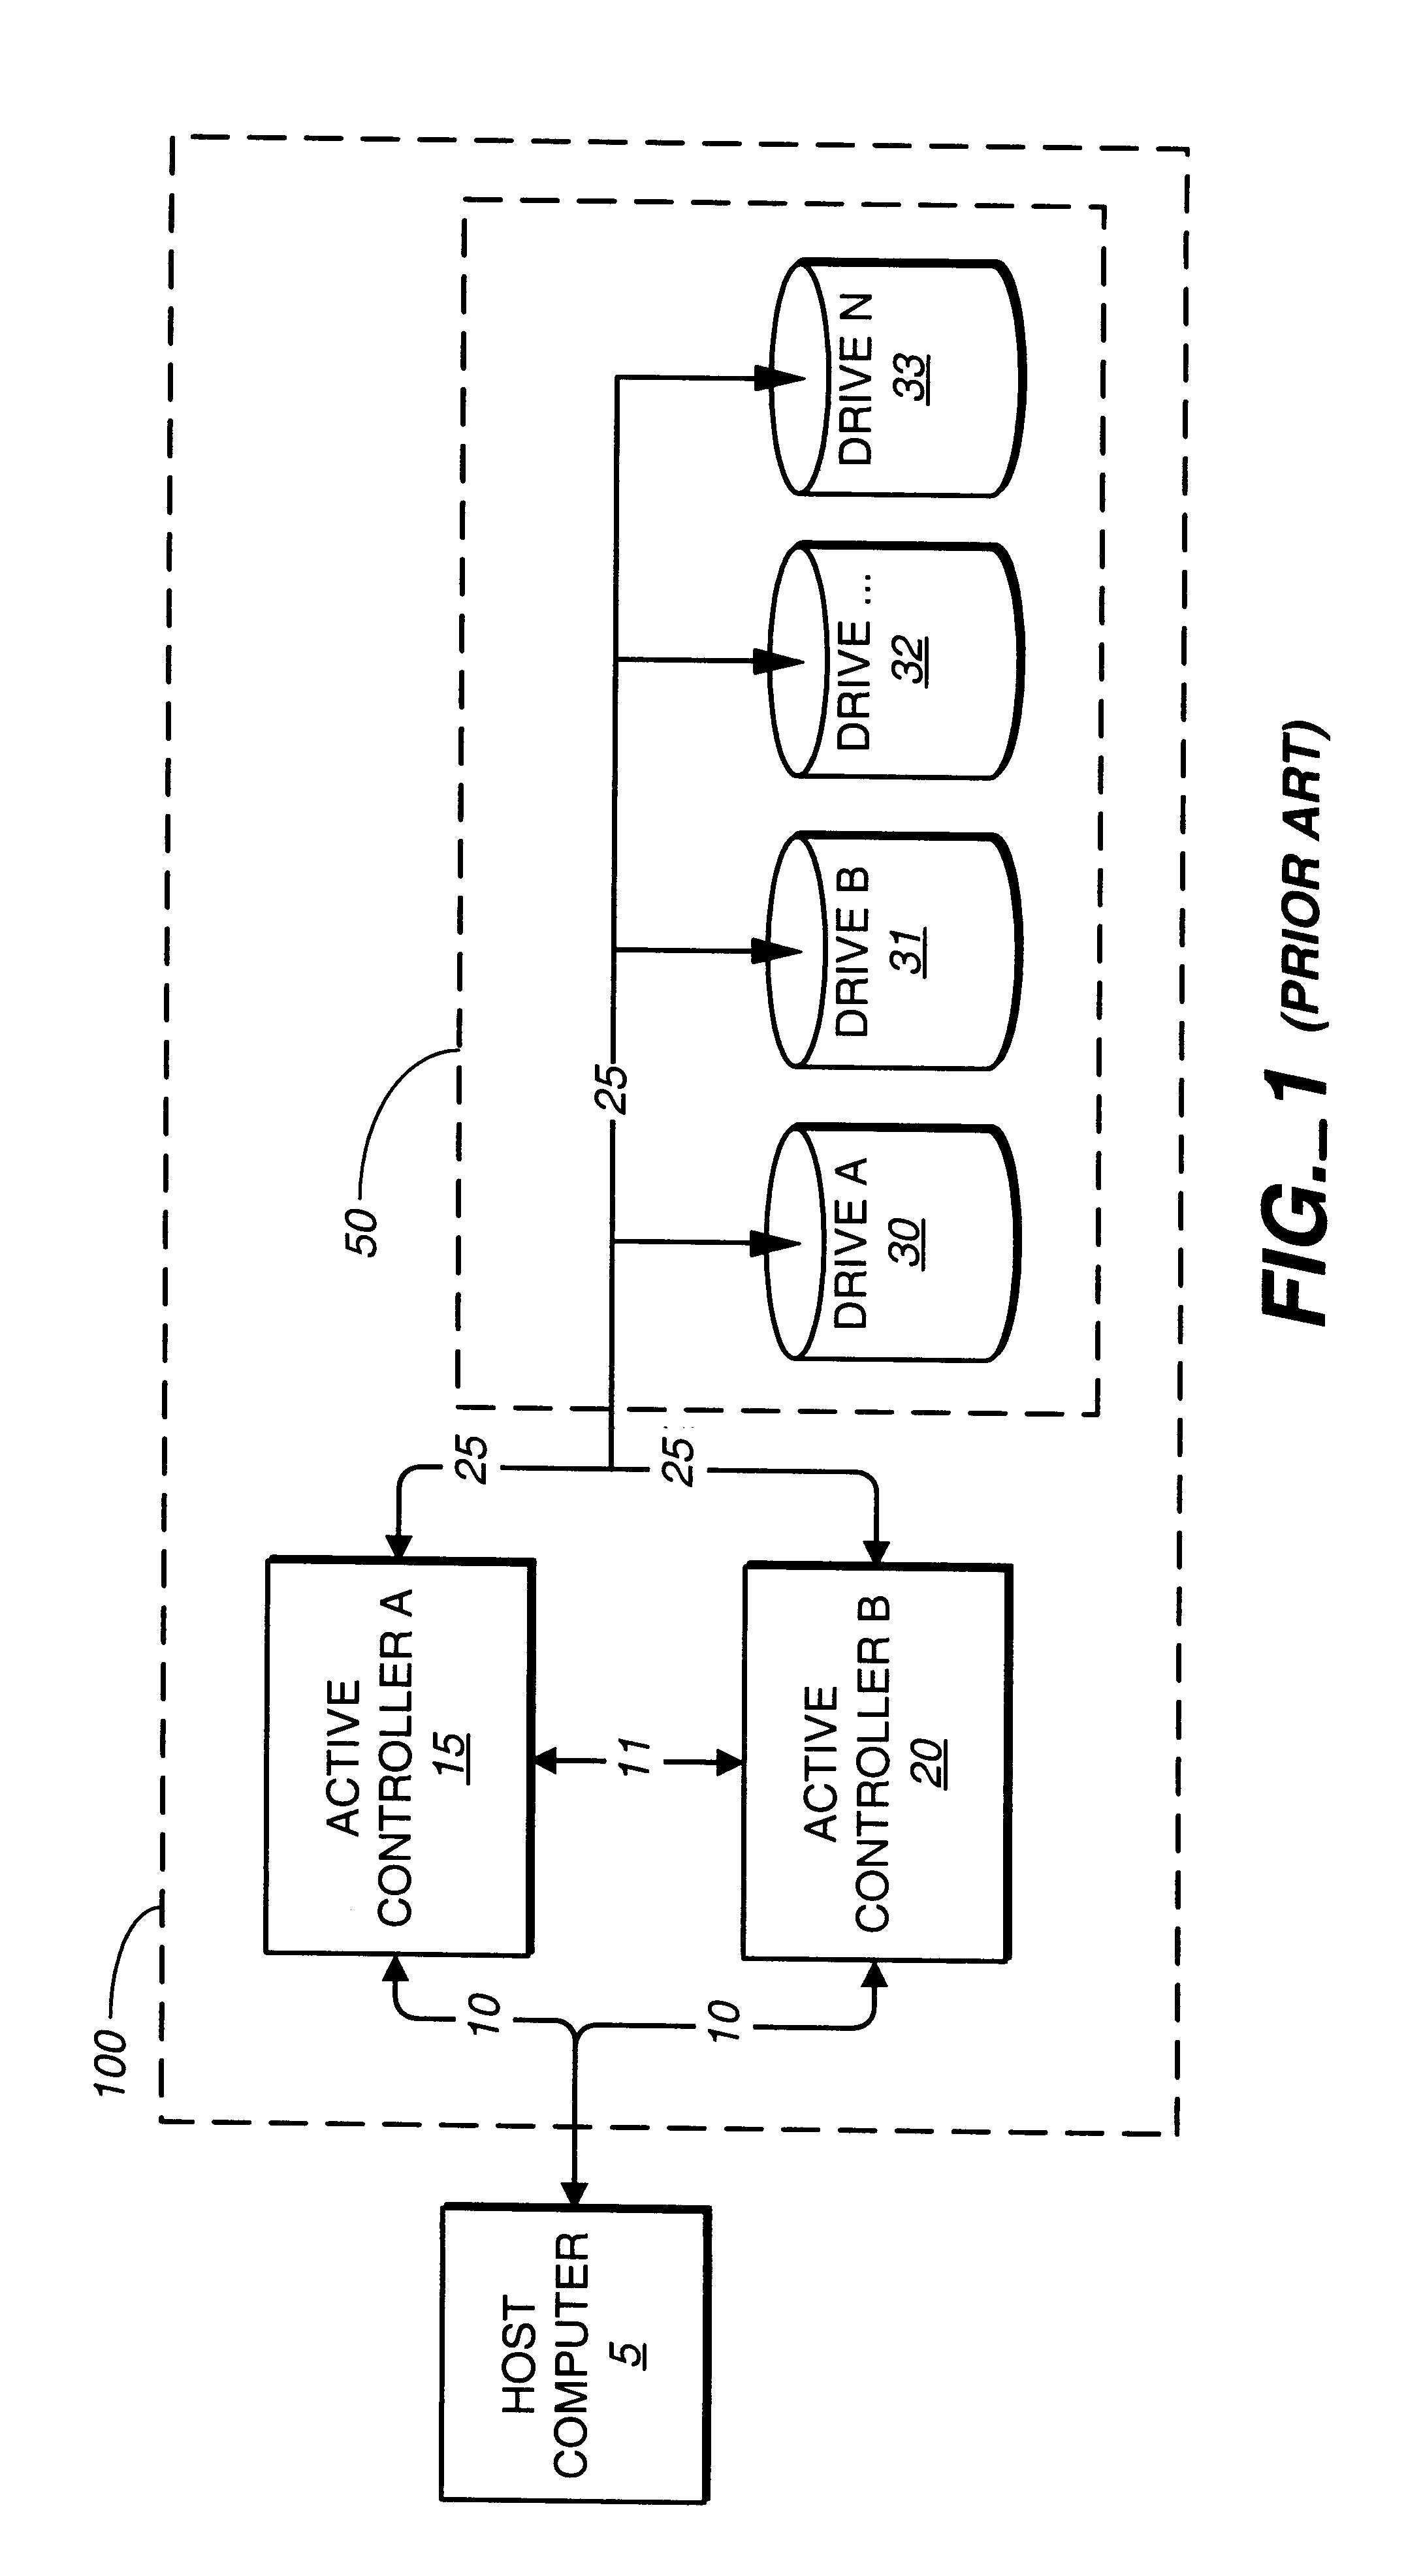 System, apparatus, and method providing cache data mirroring to a data storage system